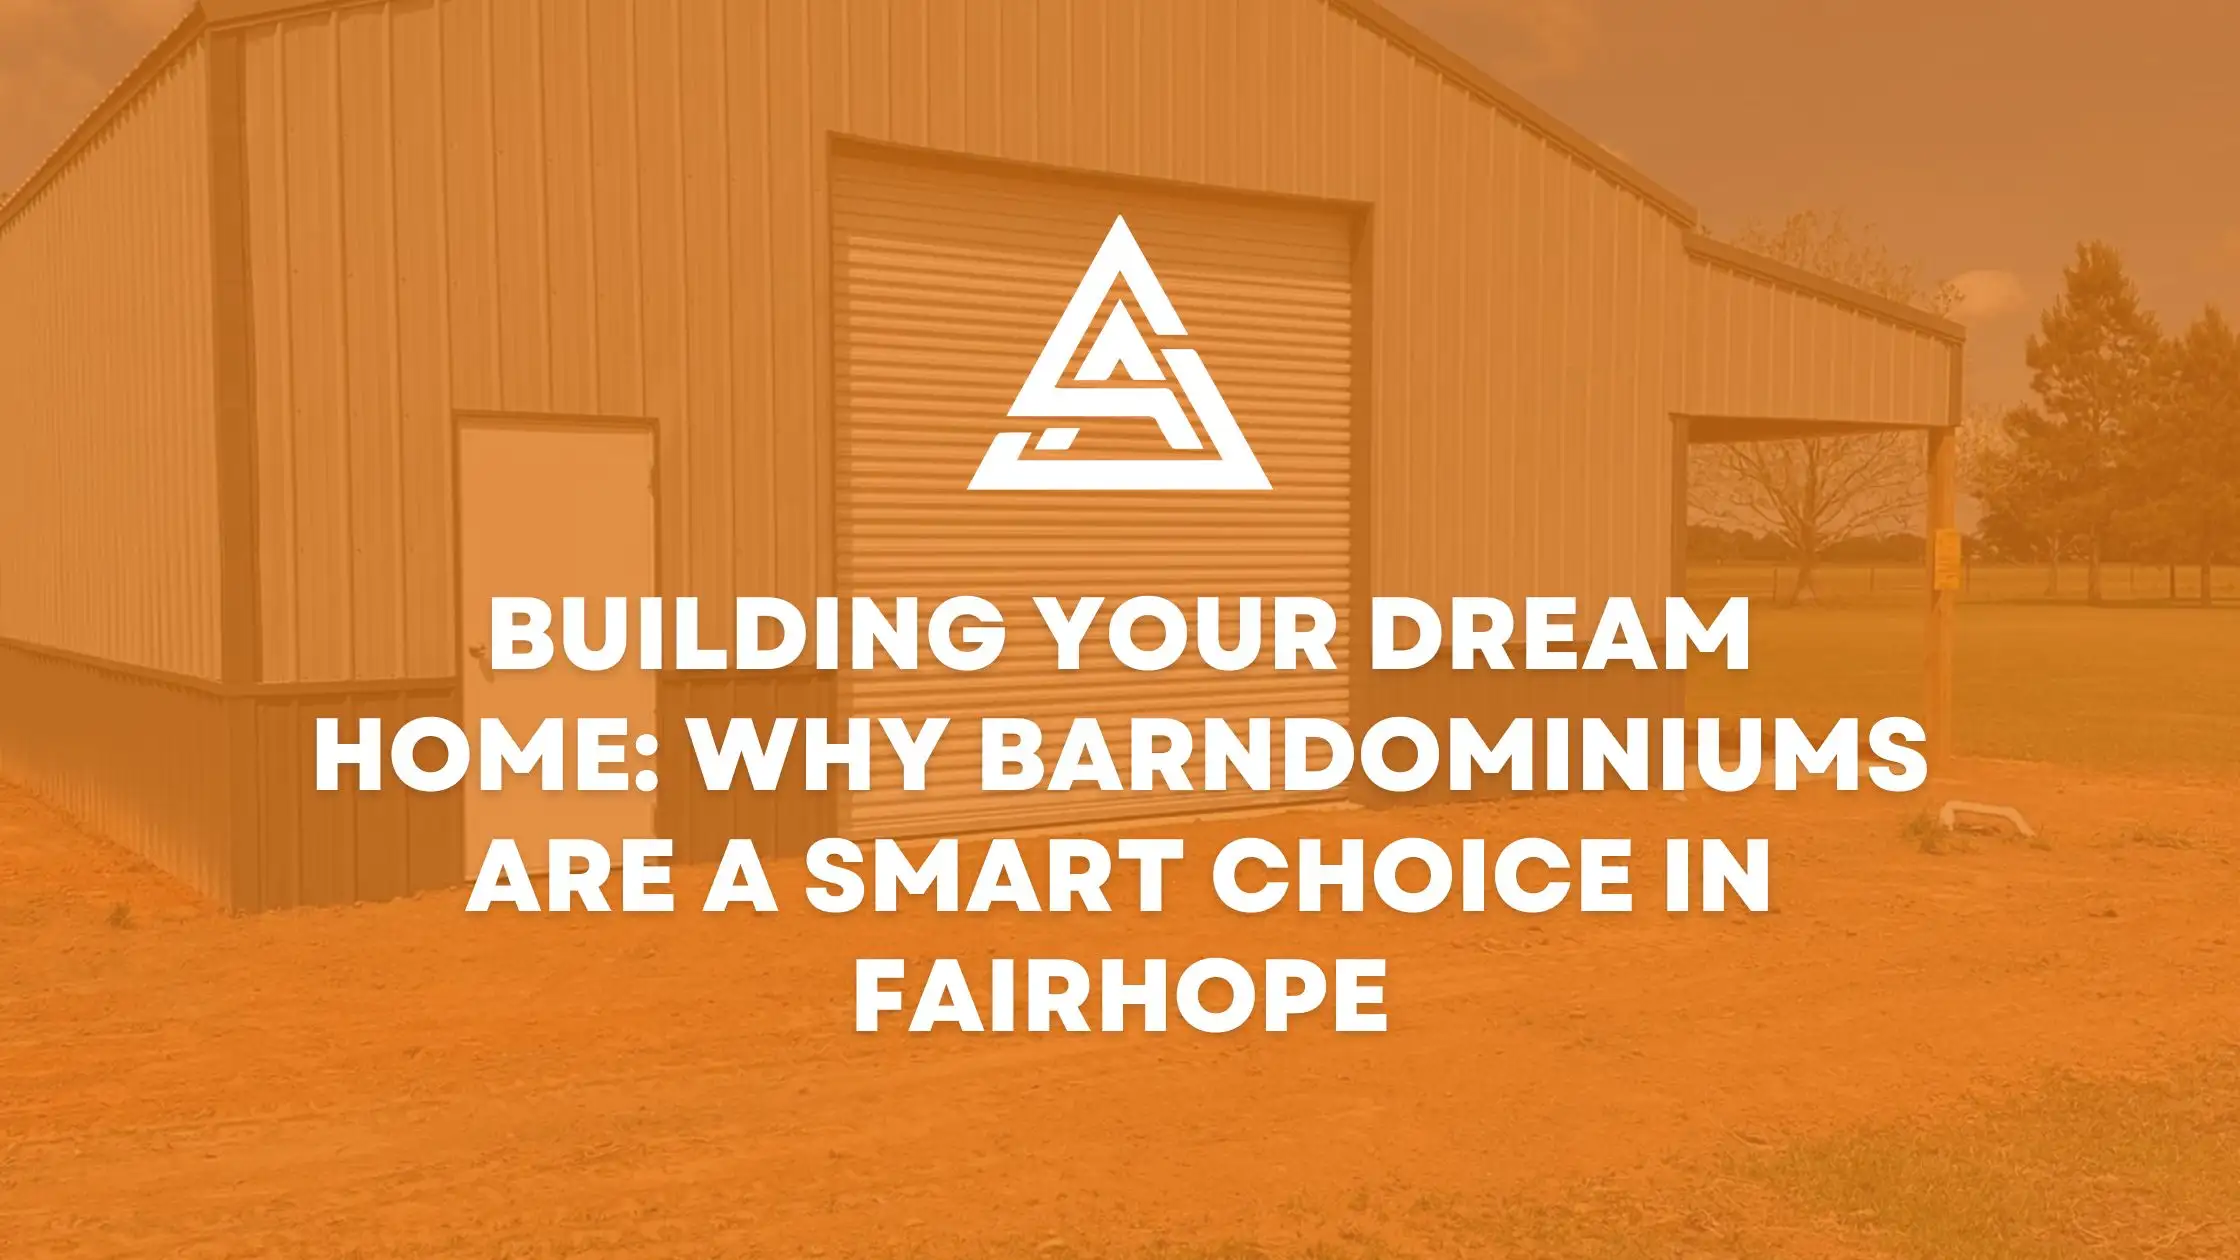 Building Your Dream Home: Why Barndominiums Are a Smart Choice in Fairhope